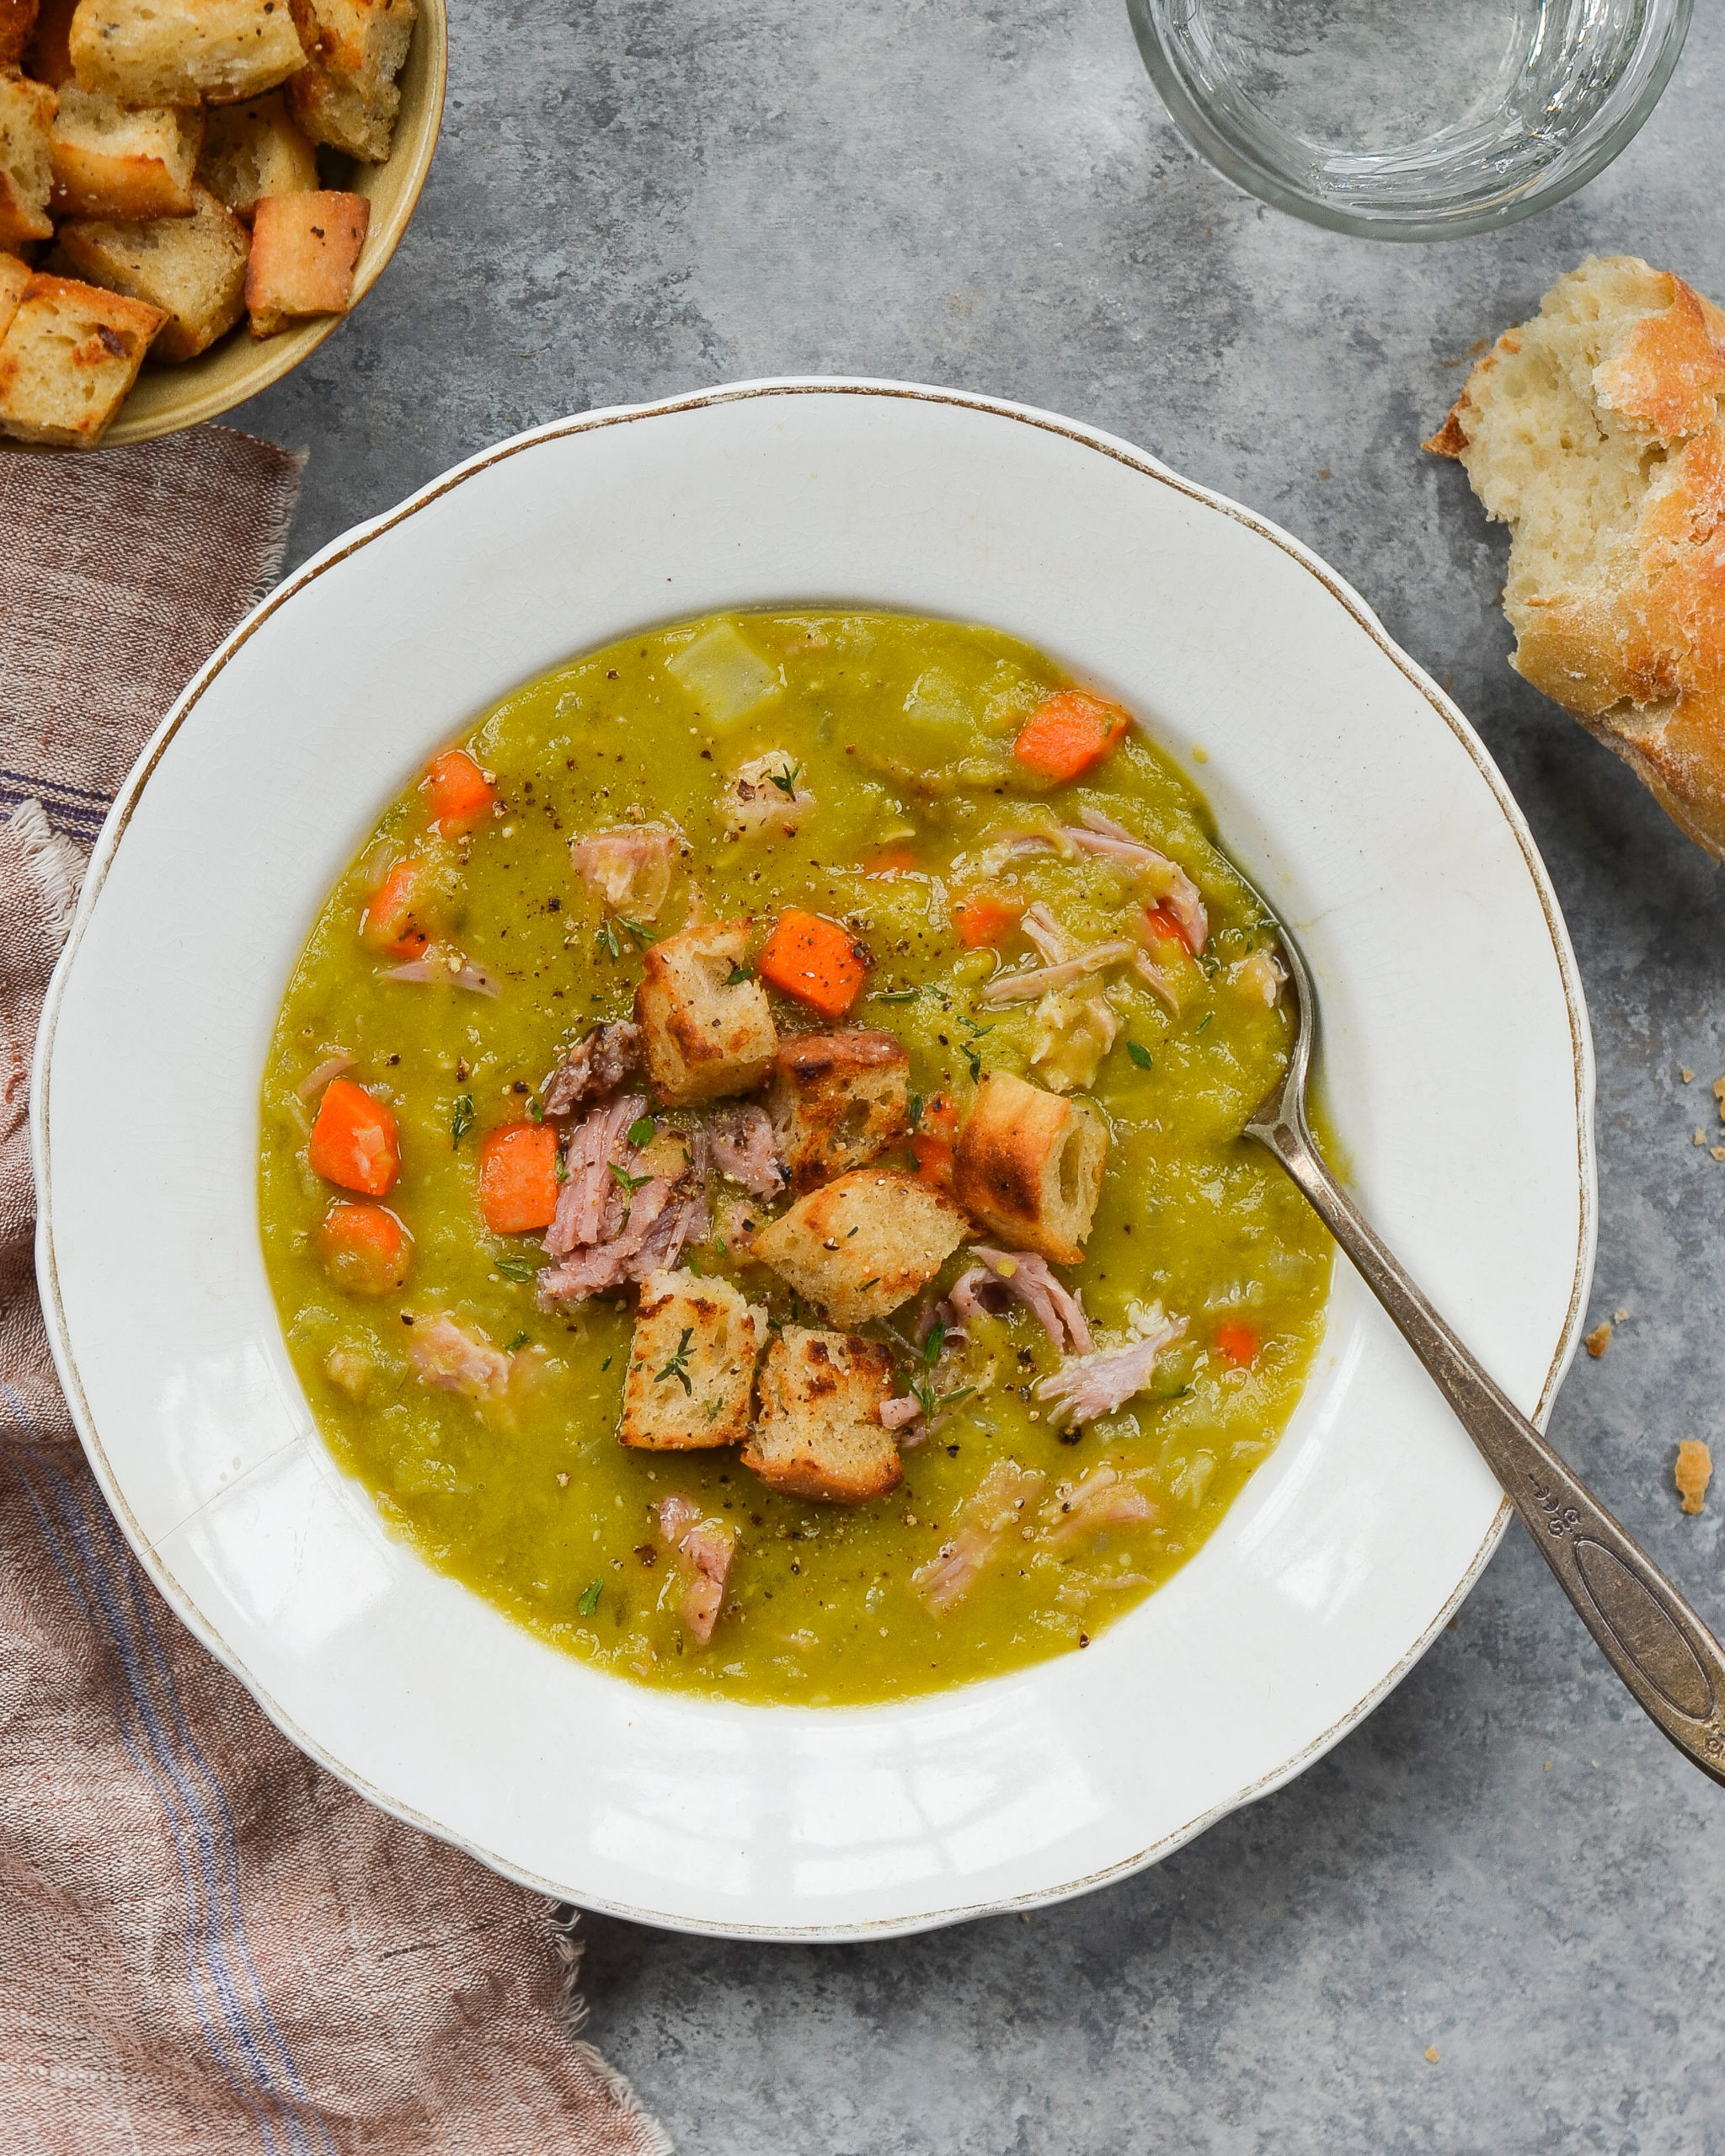 https://www.onceuponachef.com/images/2021/09/Split-Pea-Soup-with-Ham-scaled.jpg